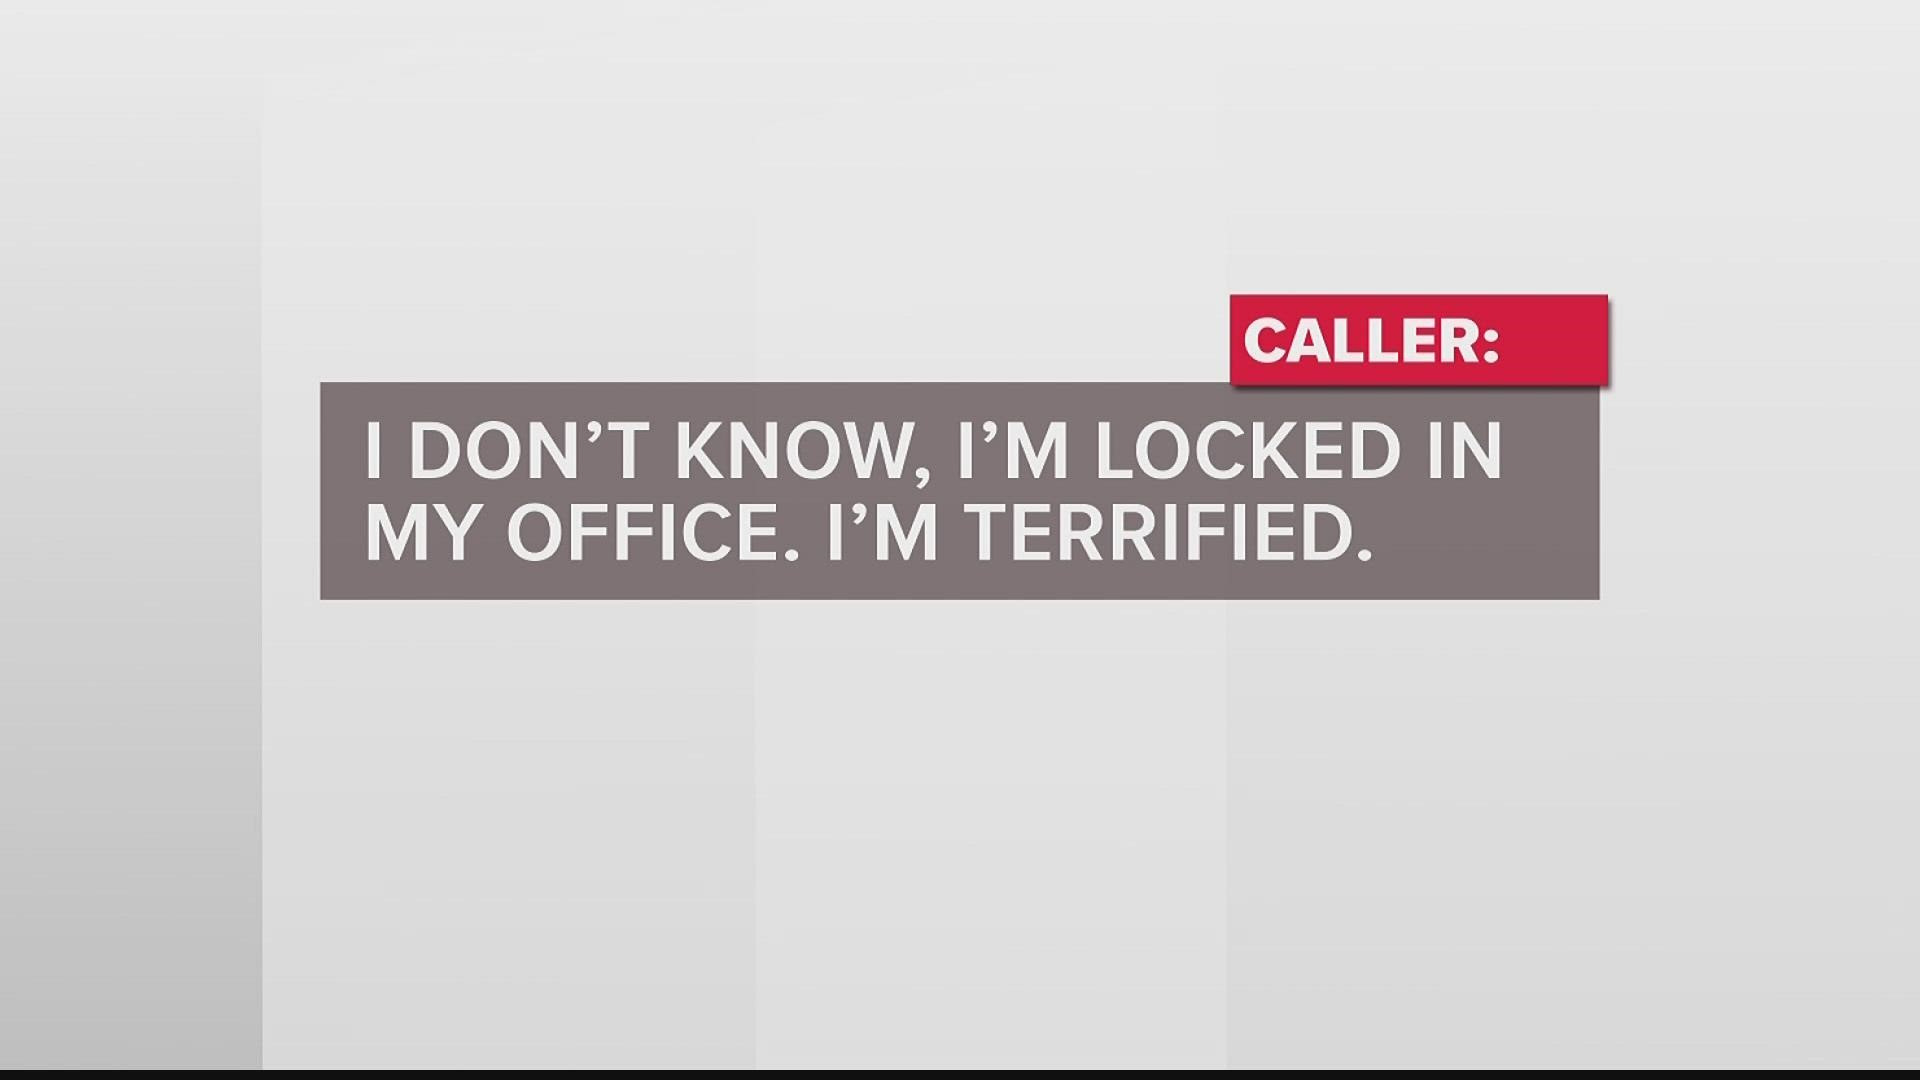 Callers are heard whispering out of fear of an active shooter in their building.